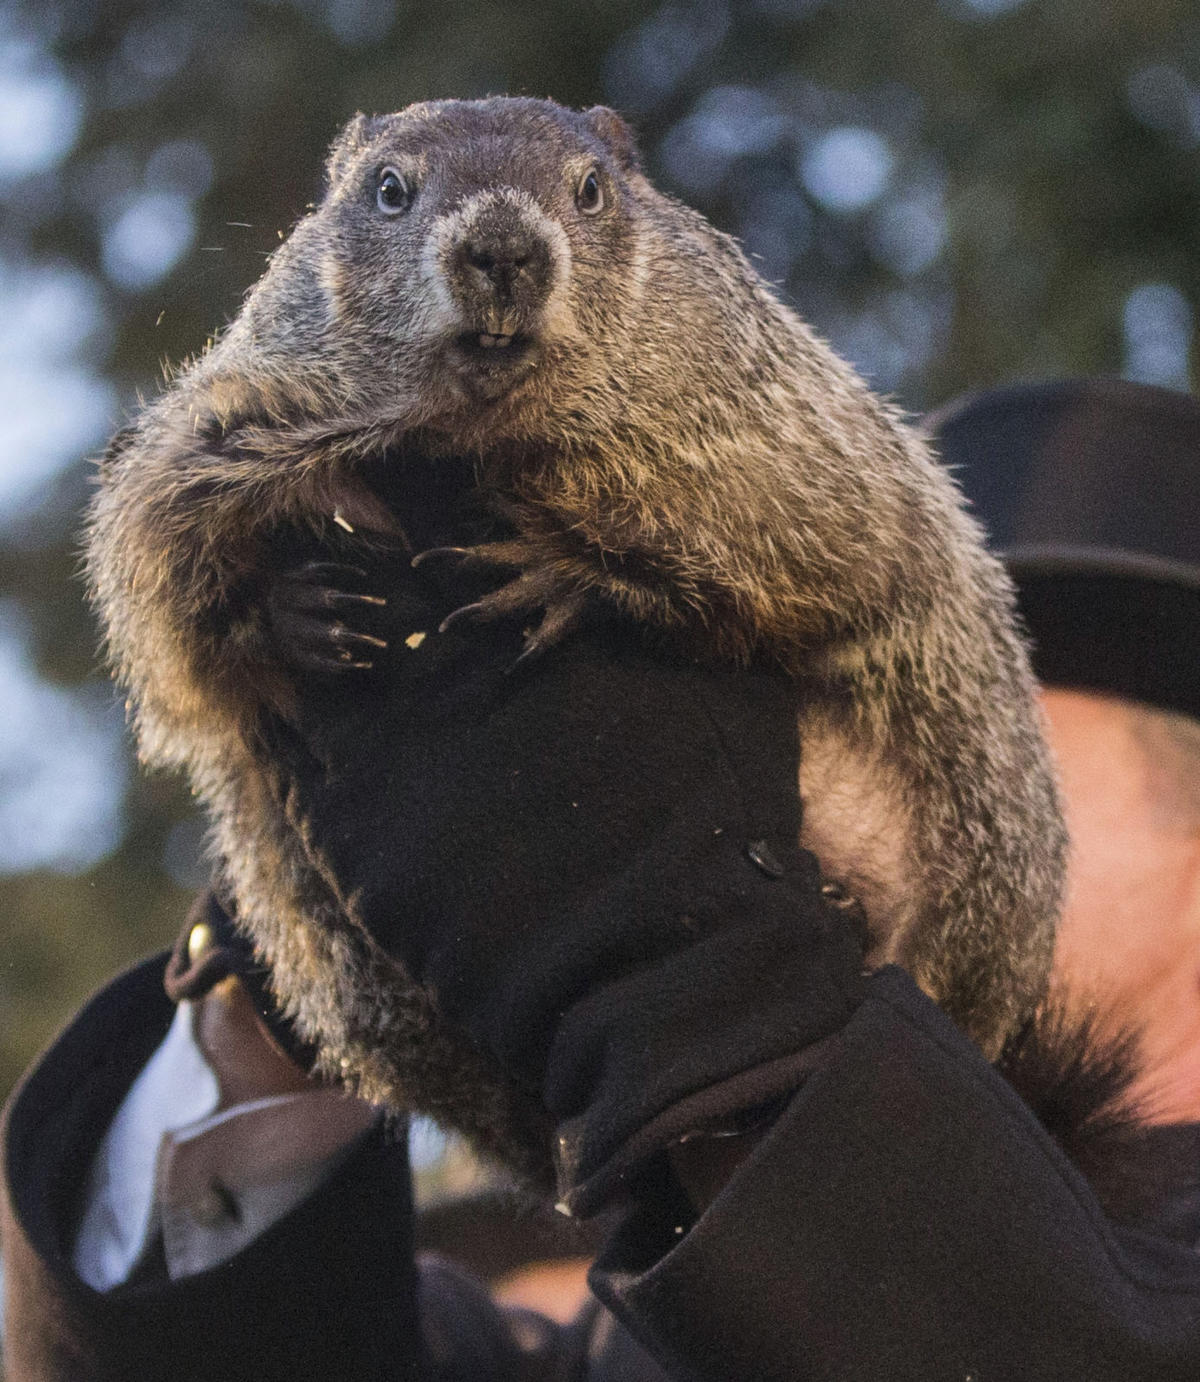 How accurate are Groundhog Day predictions?